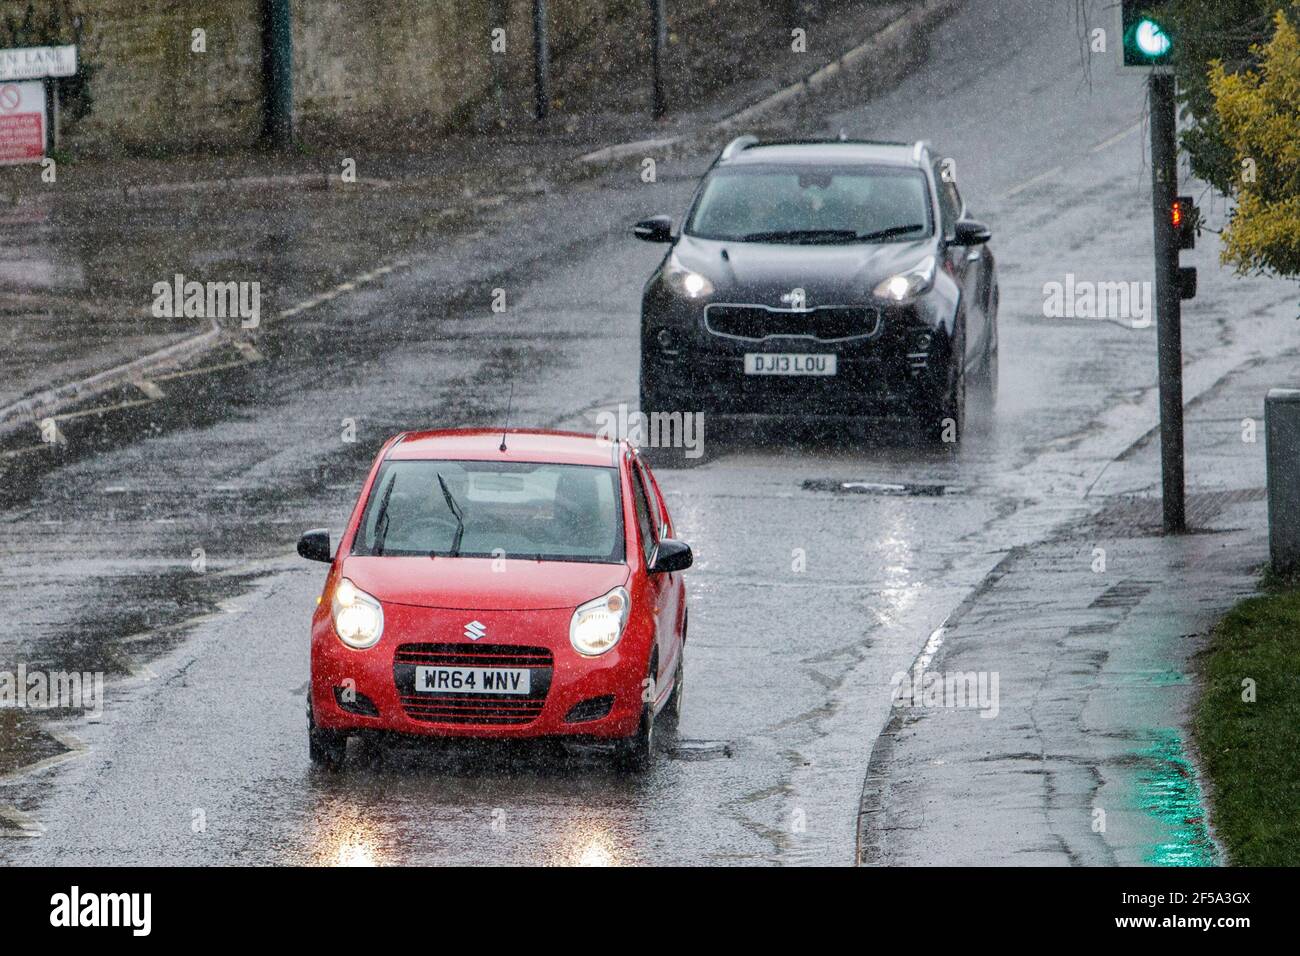 Chippenham, Wiltshire, UK, 25th March, 2021. Car drivers are pictured driving in heavy rain in Chippenham as heavy rain showers make their way across Southern England. Credit: Lynchpics/Alamy Live News Stock Photo